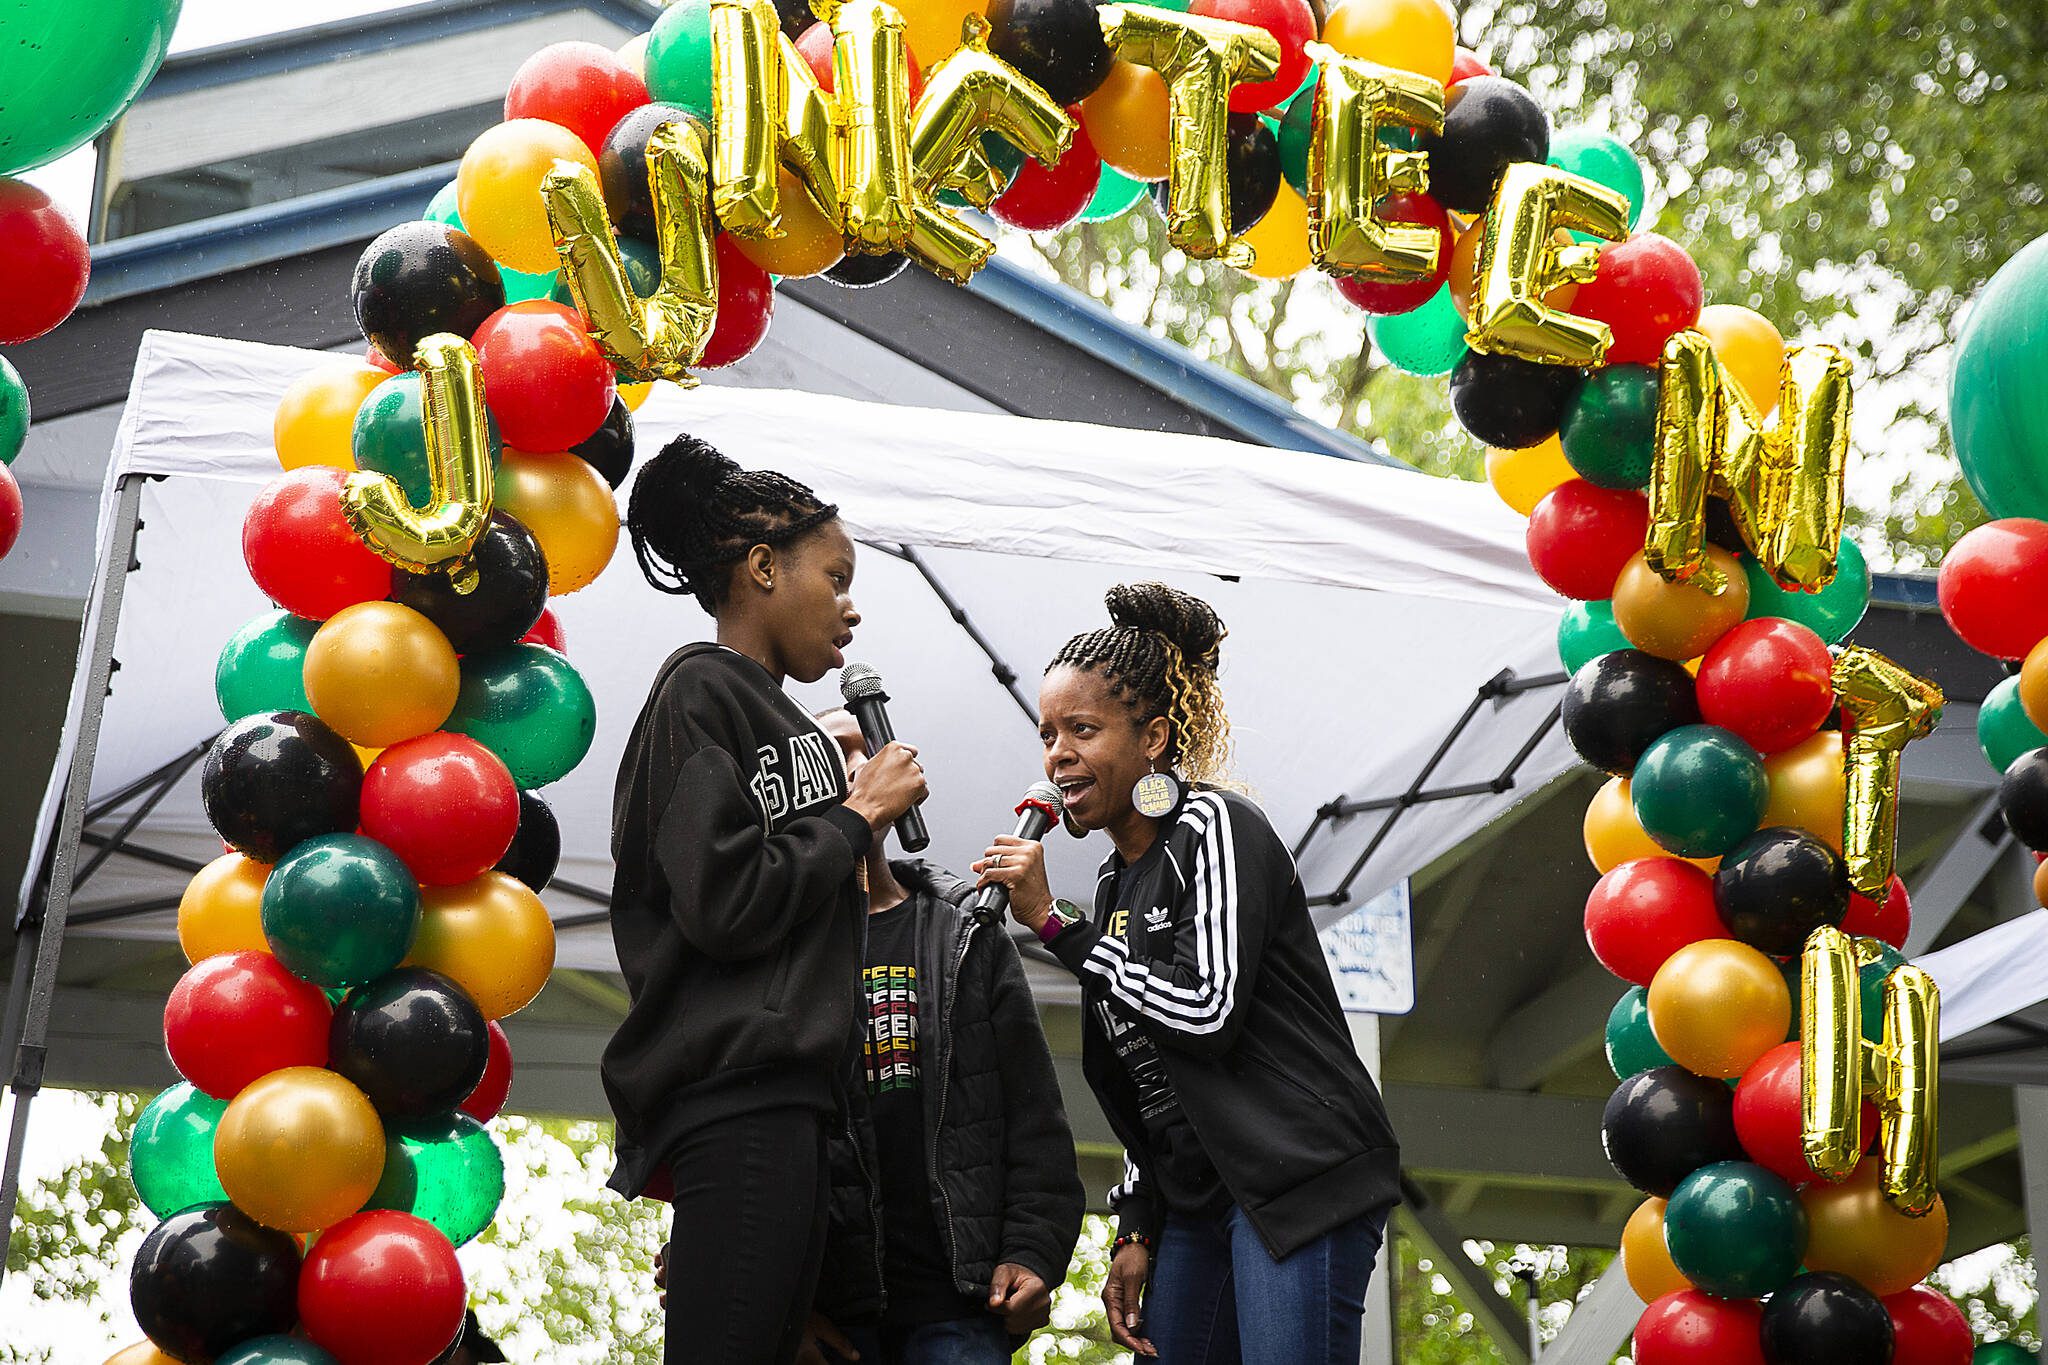 Junelle Lewis, right, daughter Tamara Grigsby and son Jayden Hill sing “Lift Every Voice and Sing” during Monroe’s Juneteenth celebration on Saturday, June 18, 2022. (Olivia Vanni / The Herald)